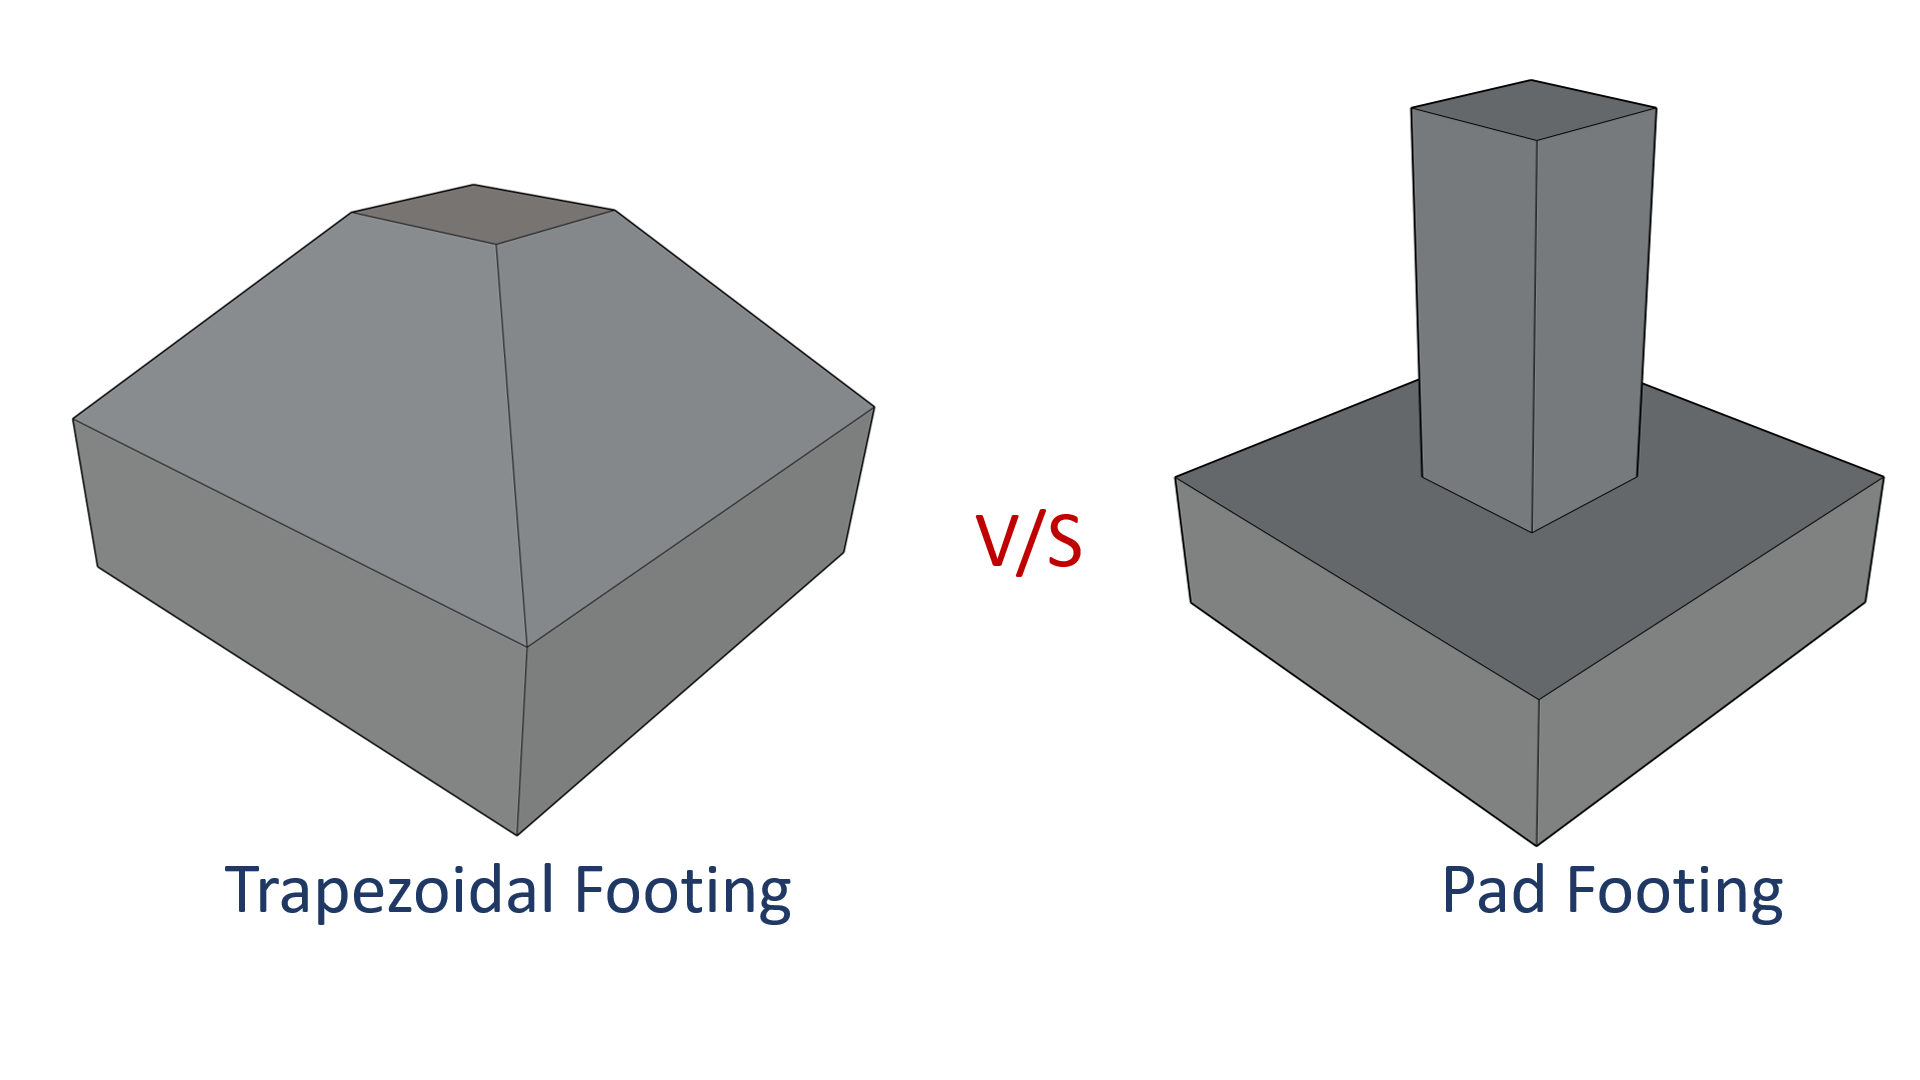 Why do we prefer trapezoidal footings over pad footings?